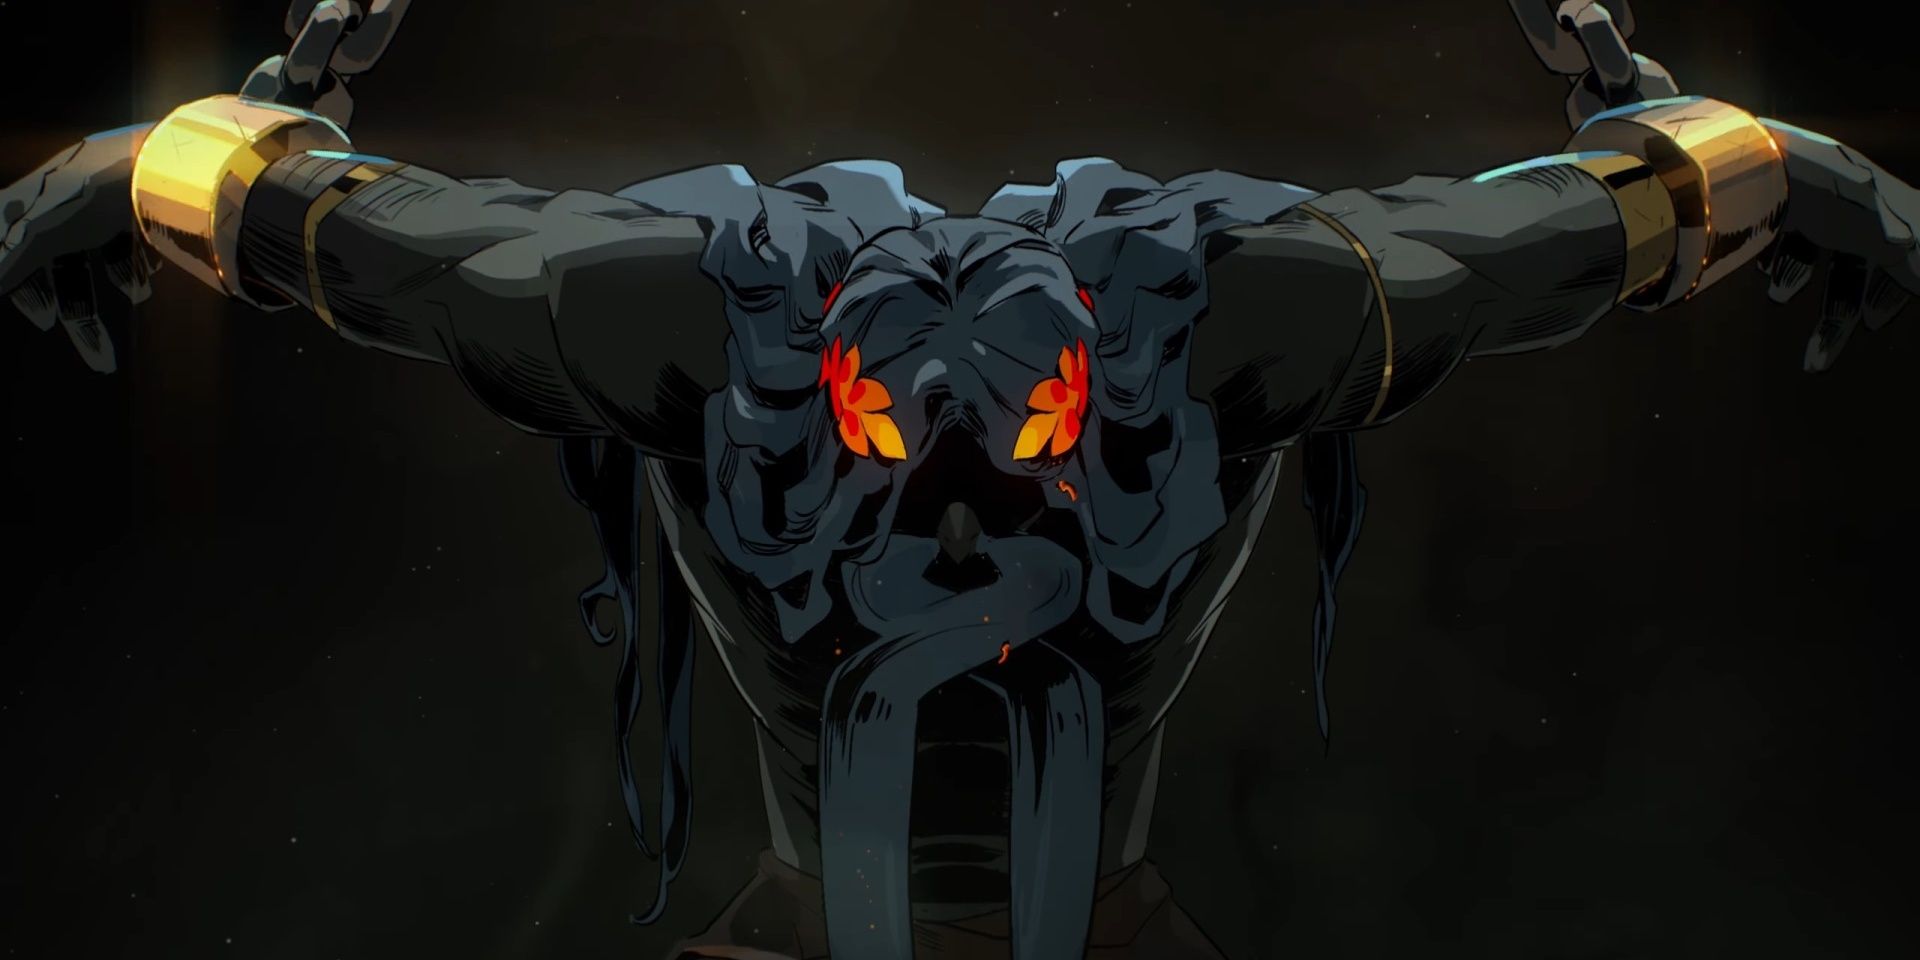 Hades chained up in the trailer for Hades 2